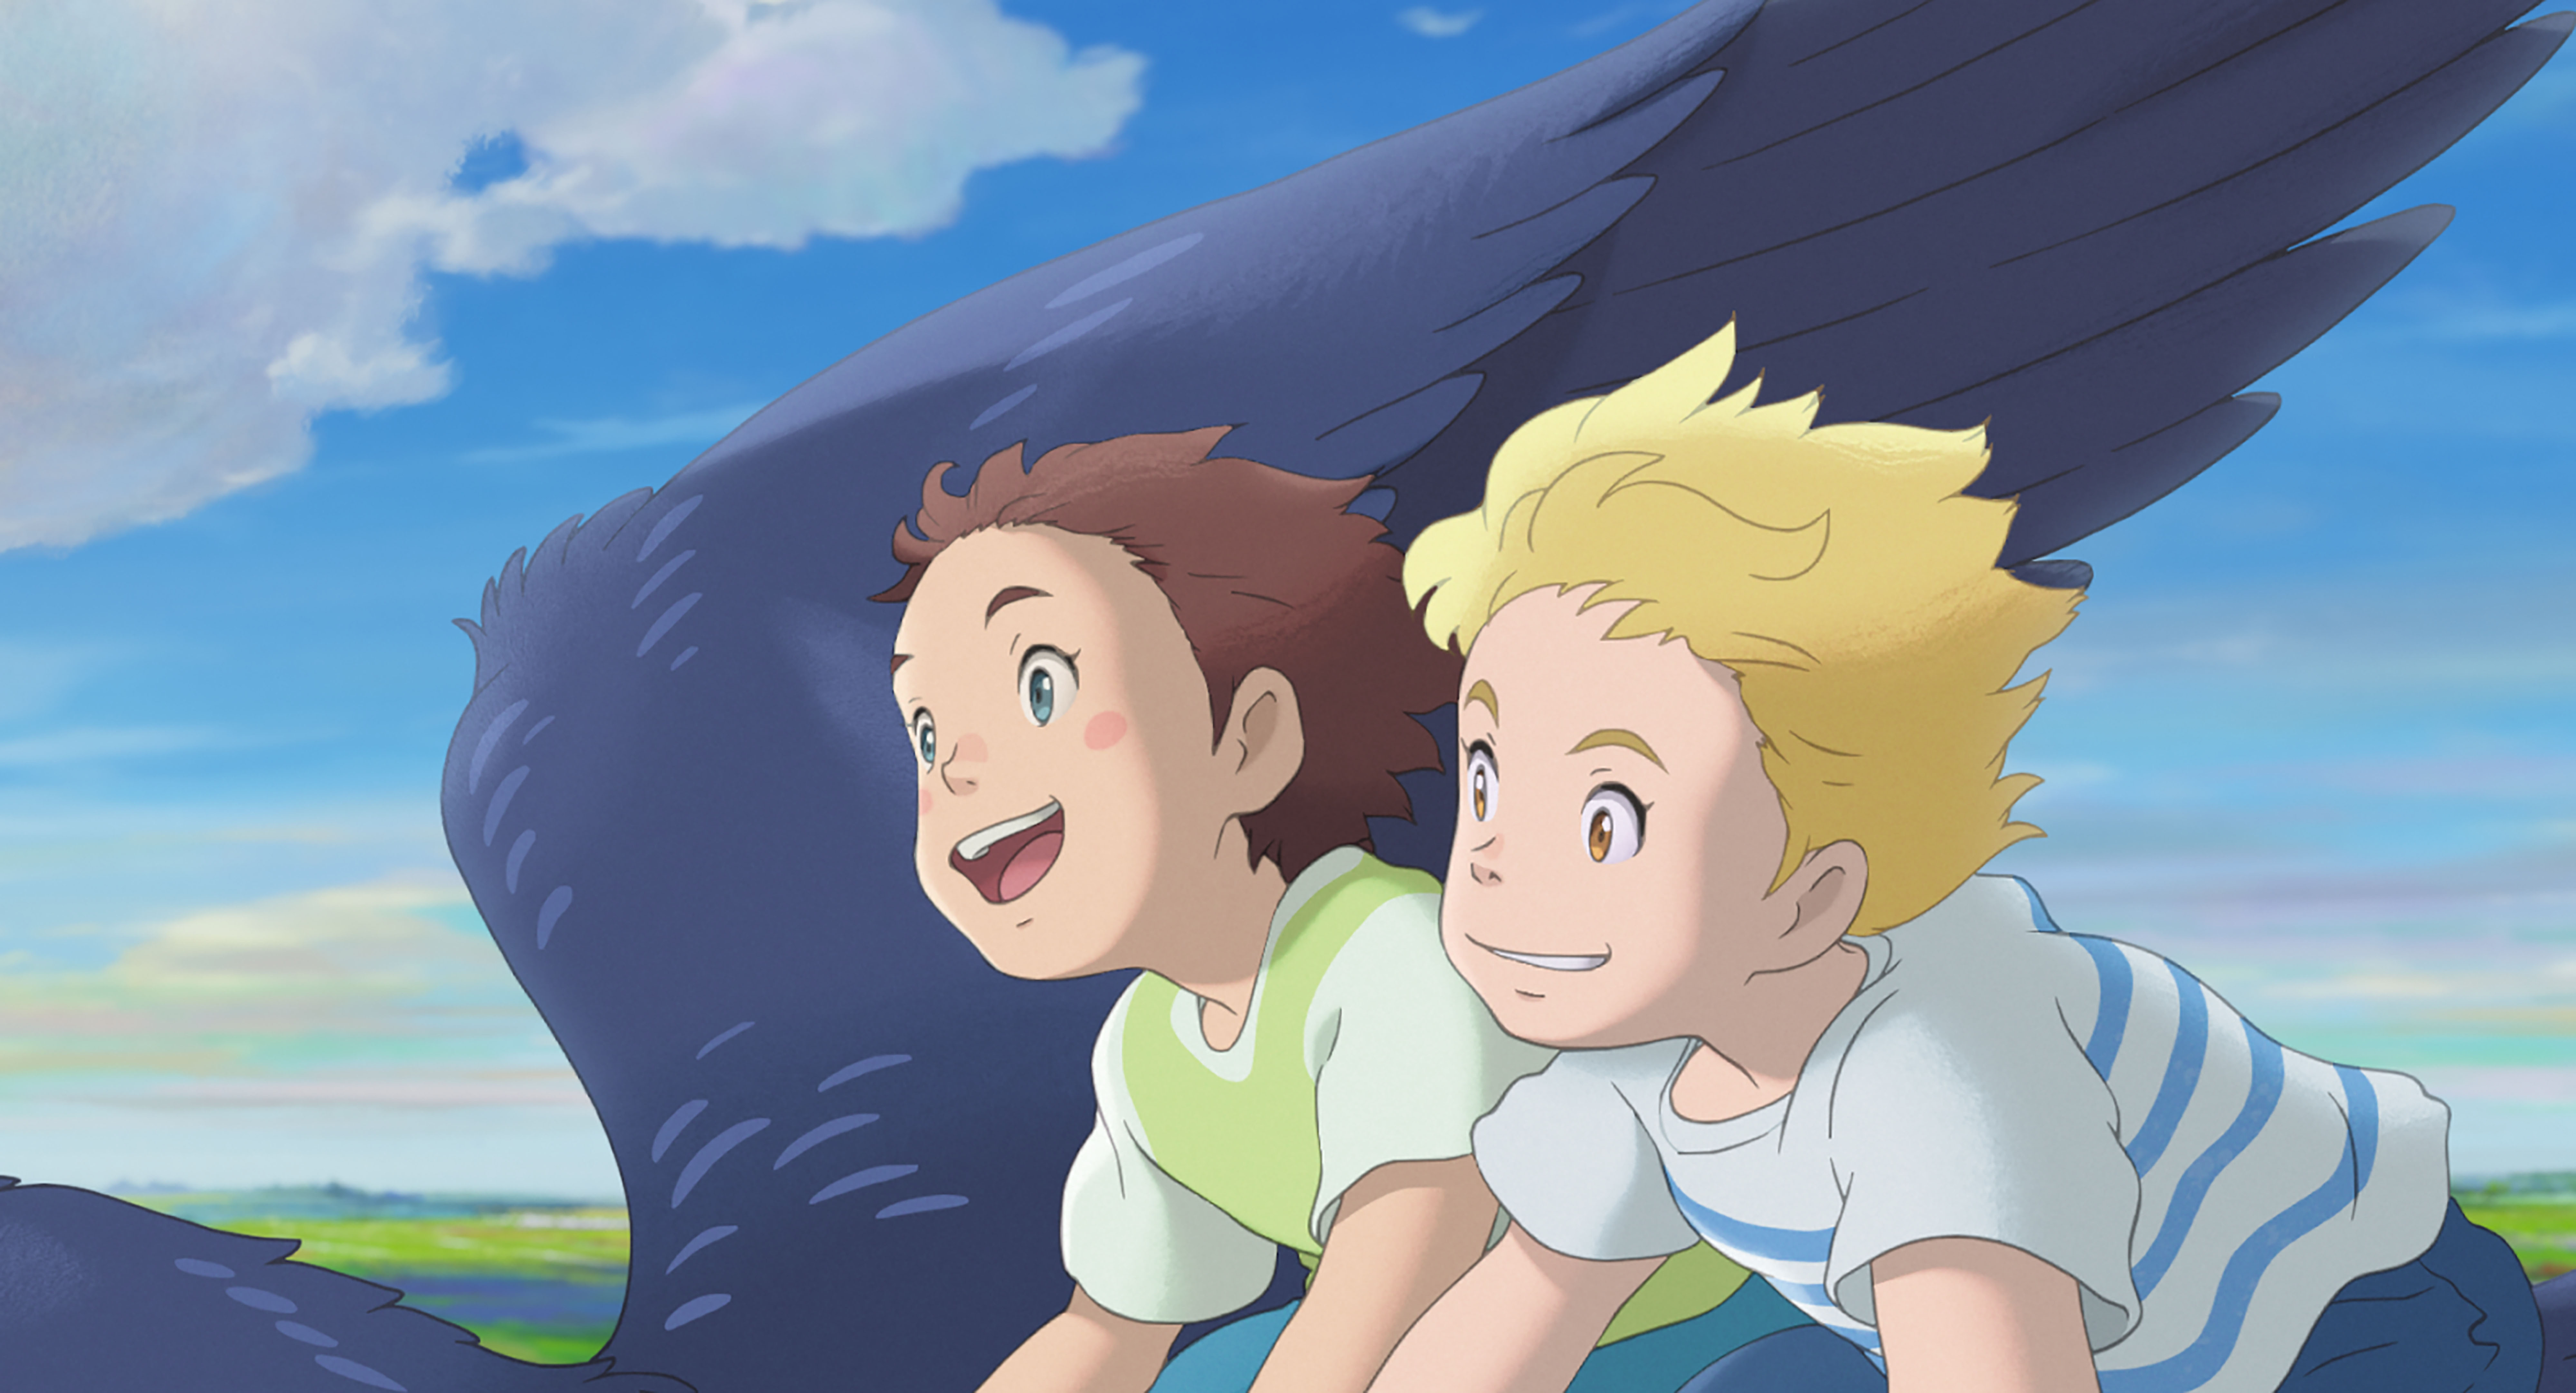 A brown-haired girl and a blond-haired boy in a striped shirt smiling while flying in the air of a giant dark blue bird in The Imaginary.